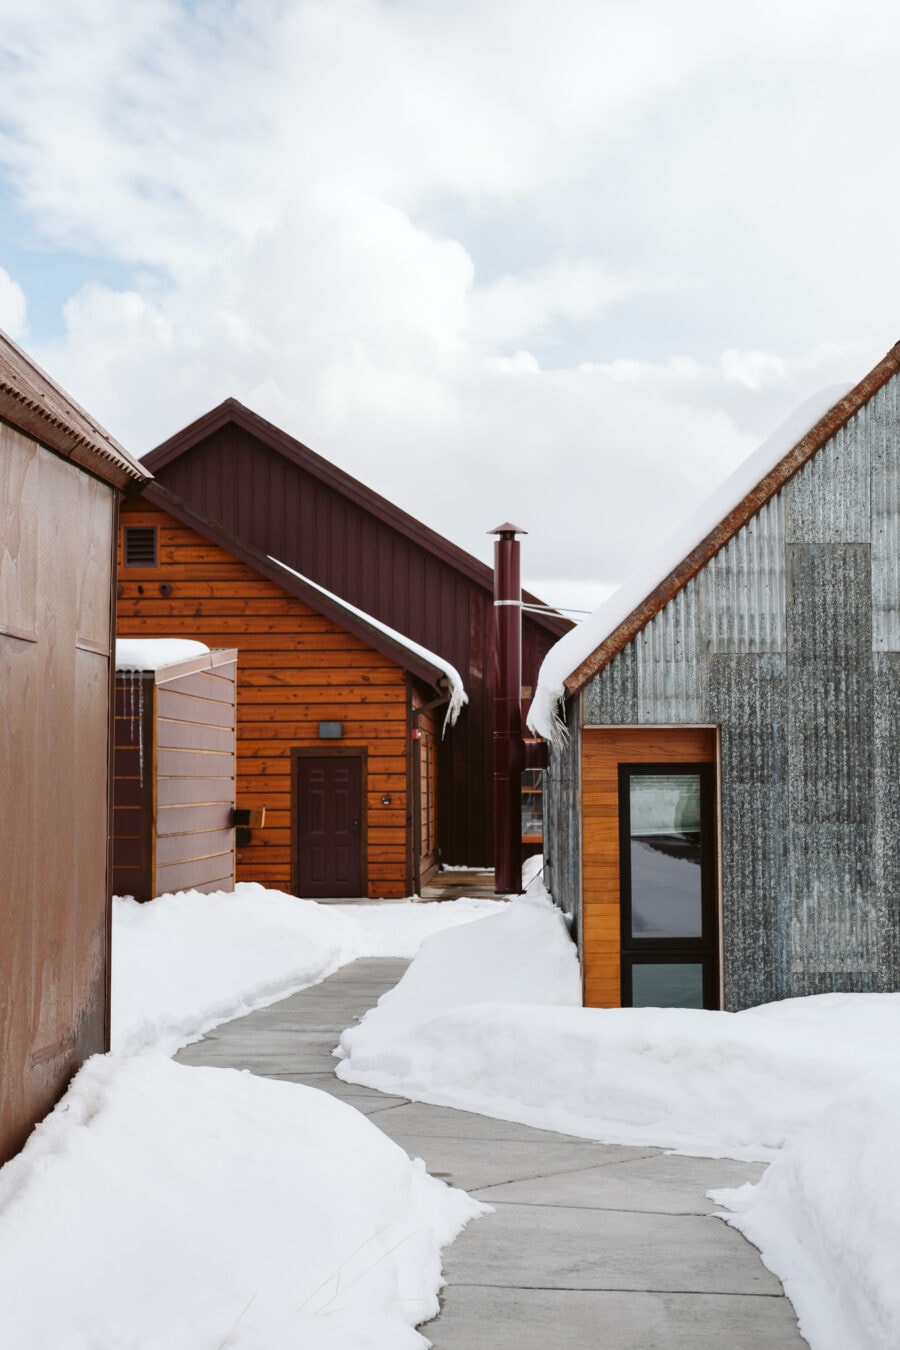 S.Lumber Yard cabins at FREIGHT in Leadville